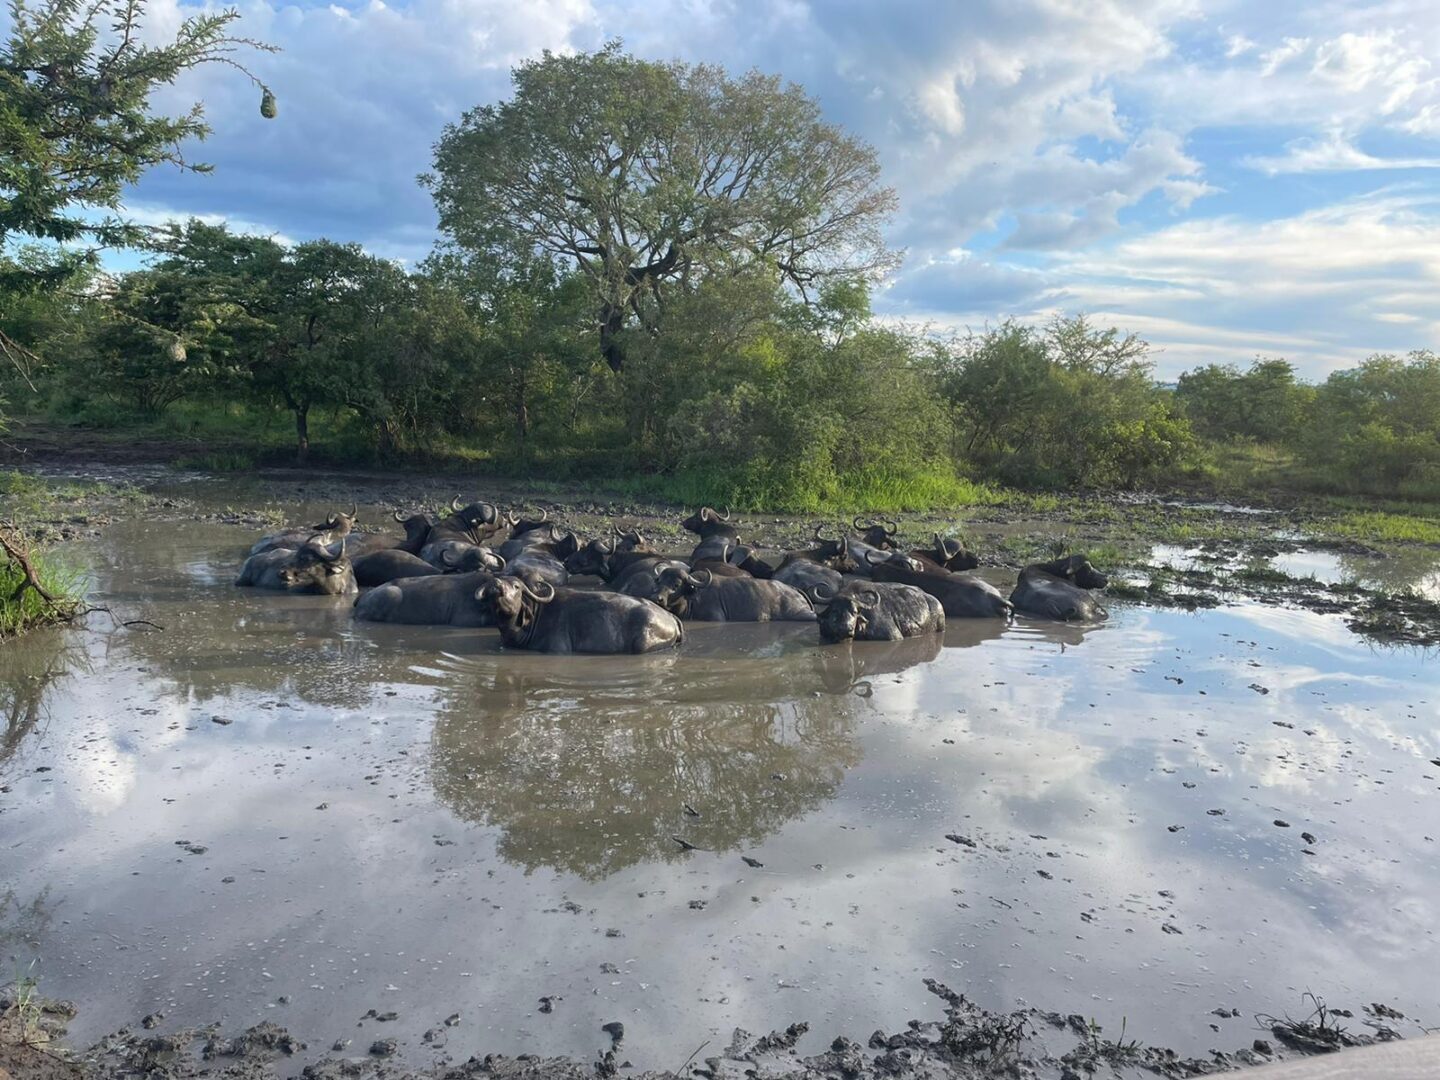 A herd of cattle in shallow water near trees.